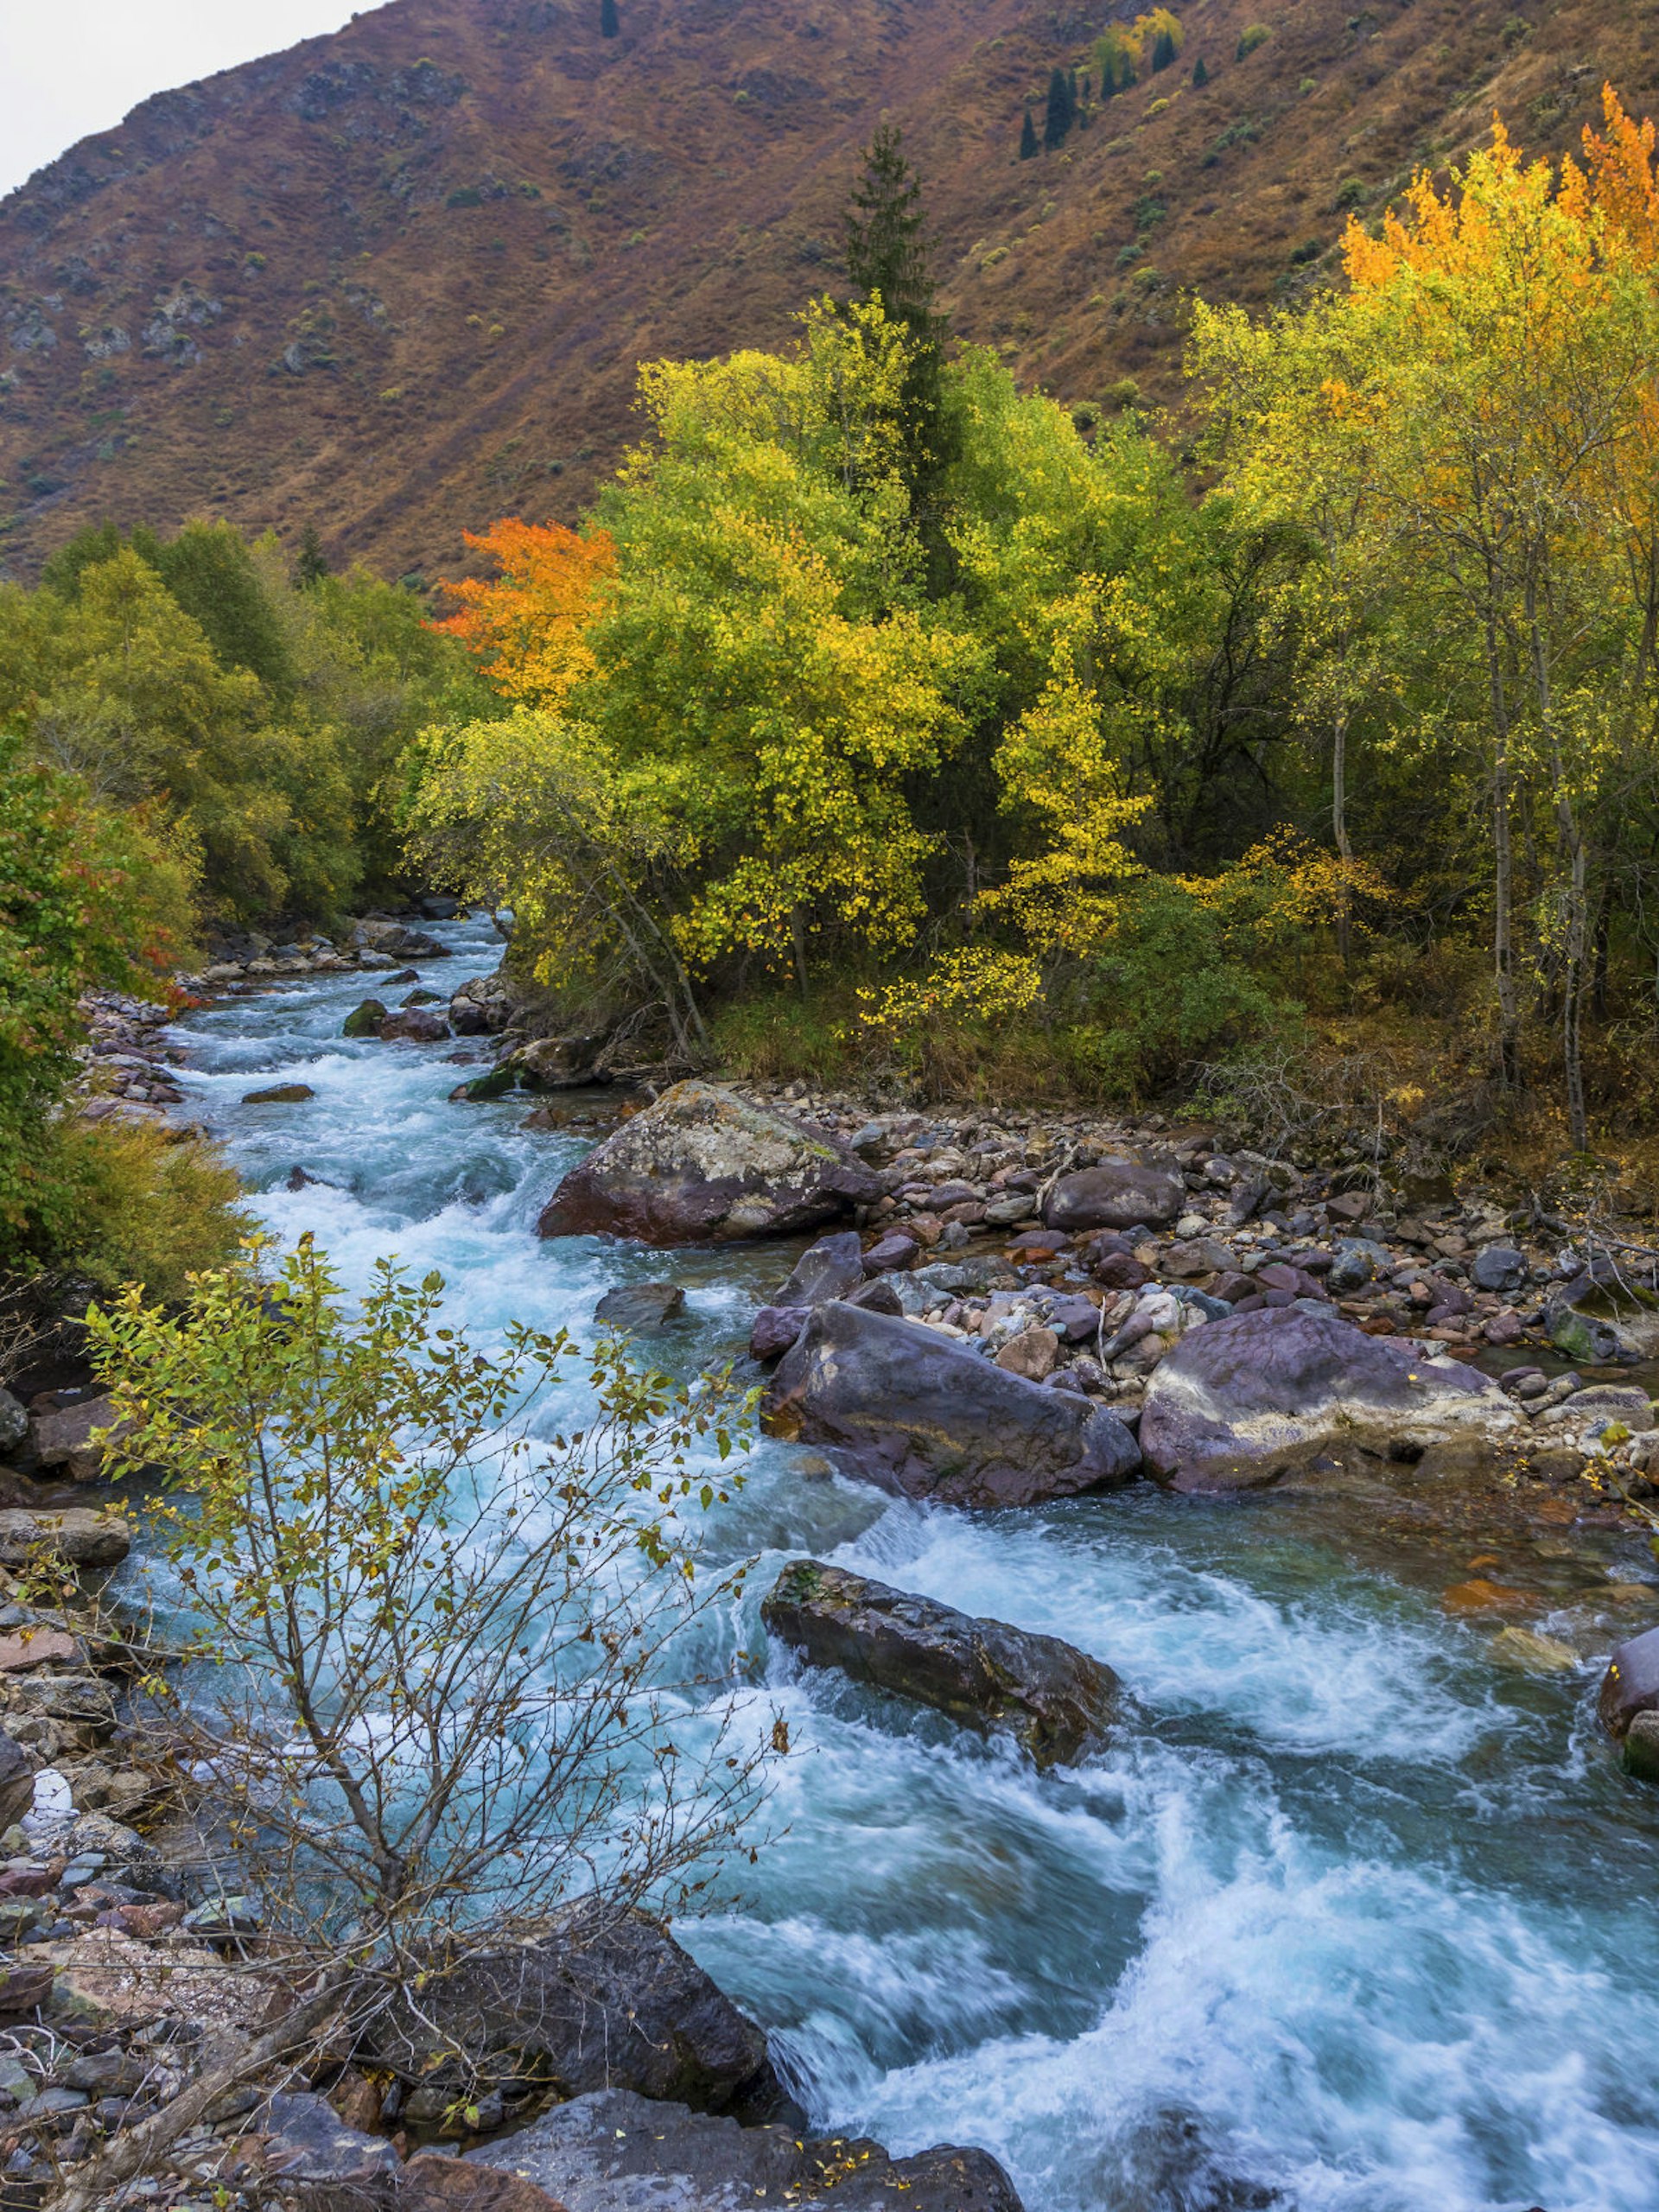 A shallow, white-water river flows through a desert valley with trees in autumn colour © Yuri Turkov / Shutterstock